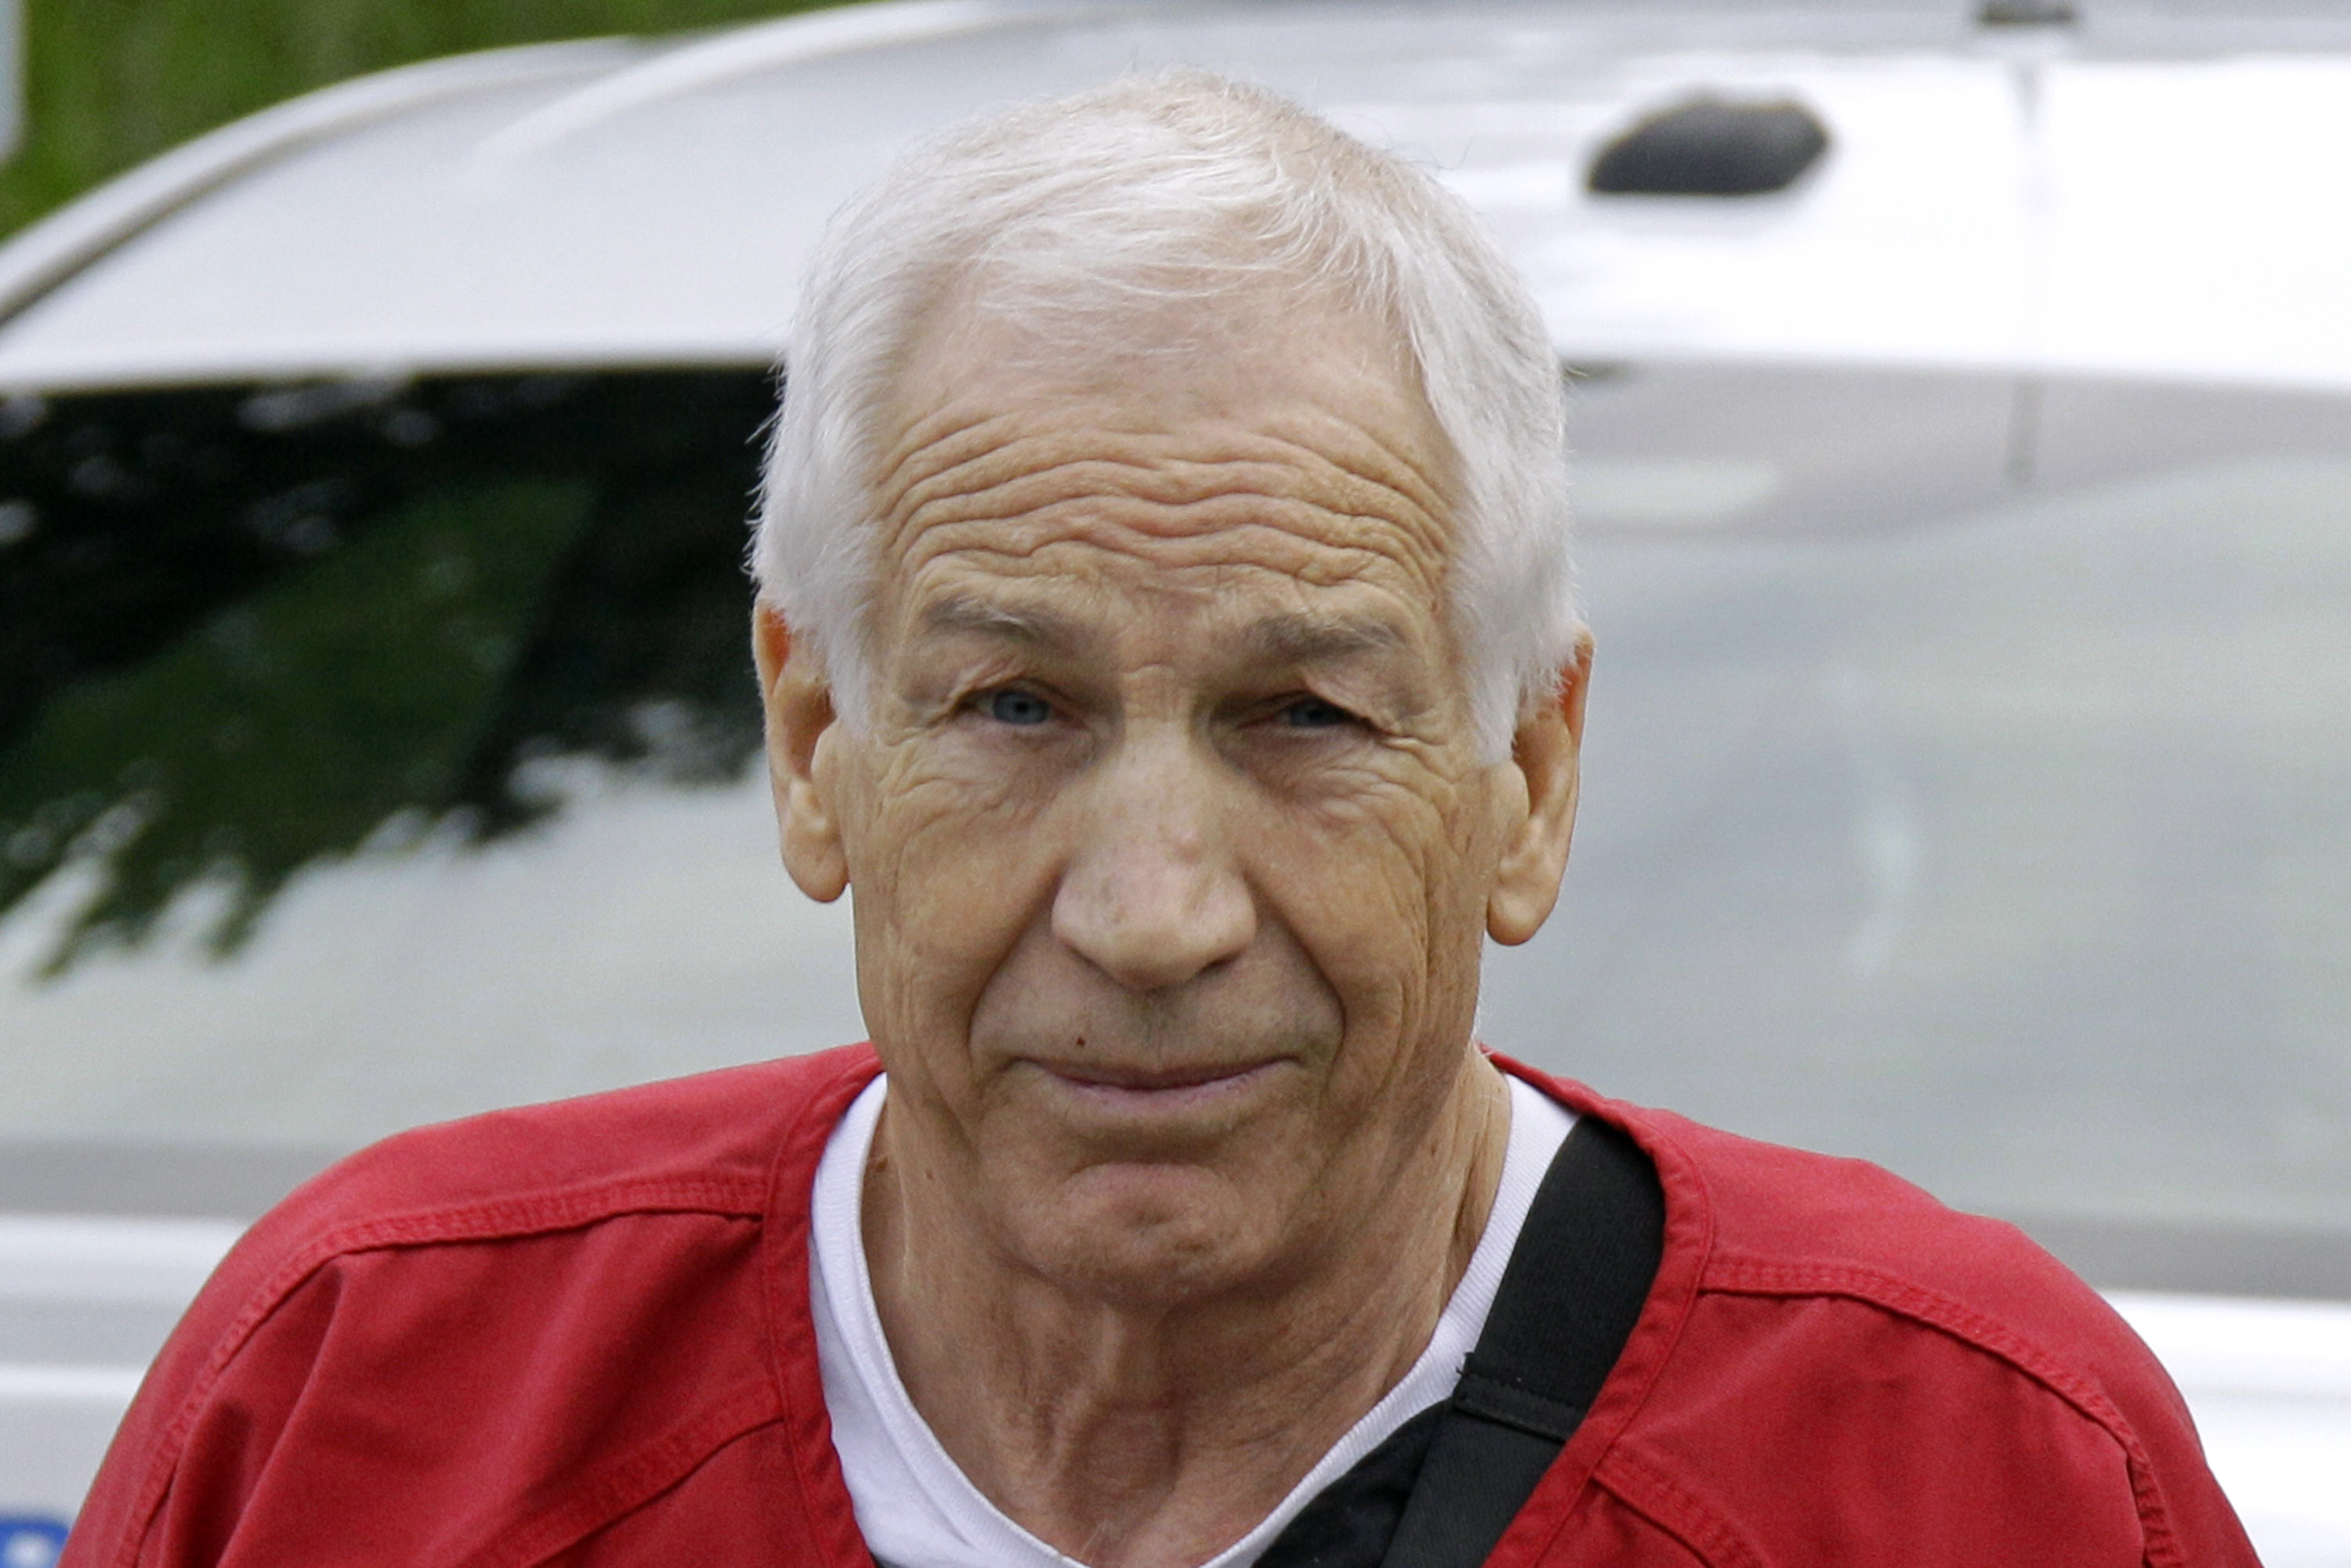 Jerry Sandusky Sentenced: Former Penn State assistant football coach gets  30 to 60 years in prison - CBS News